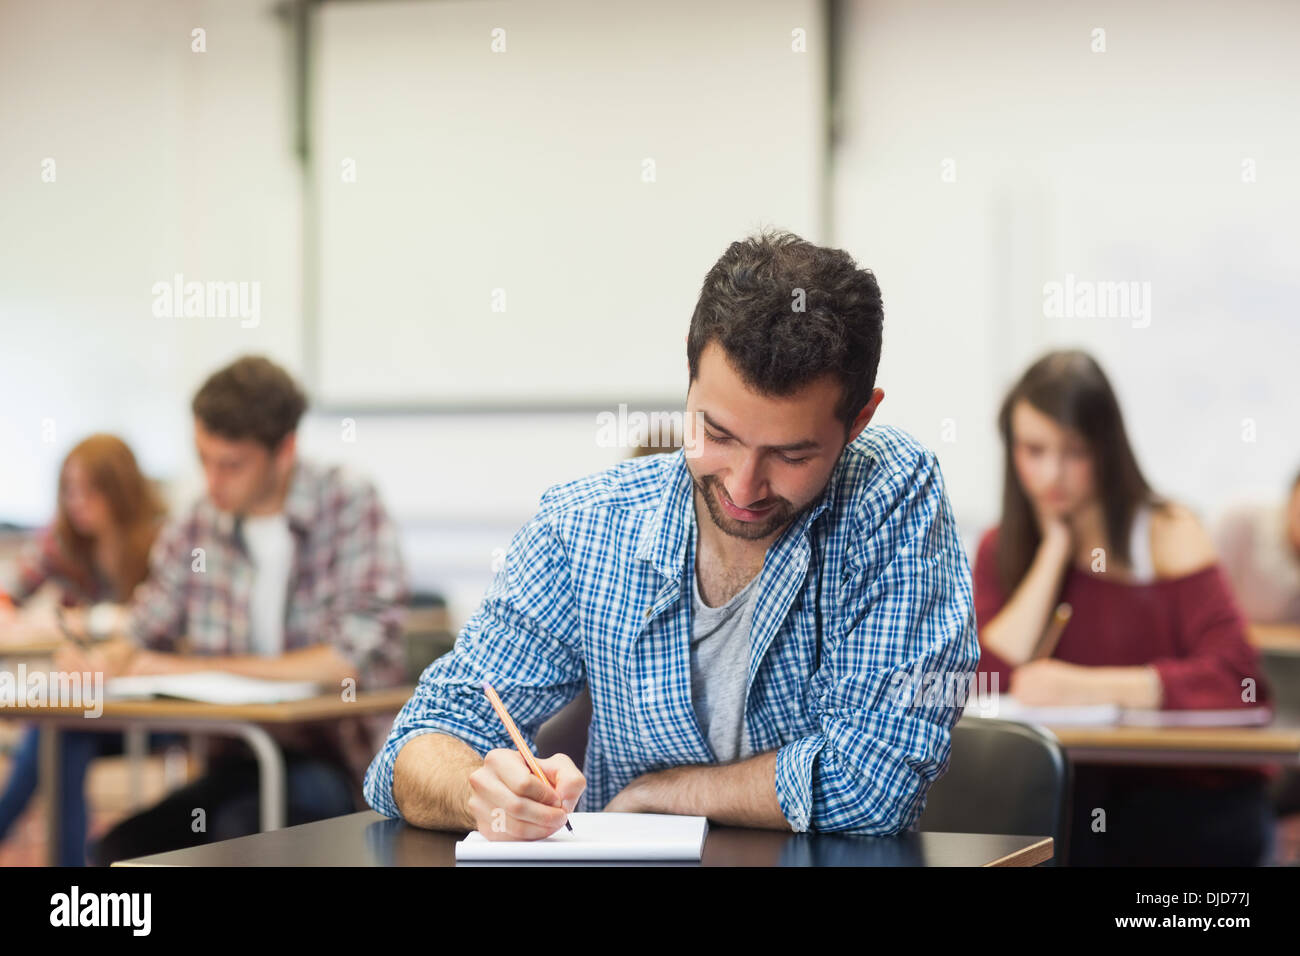 Focused student taking notes in class Stock Photo